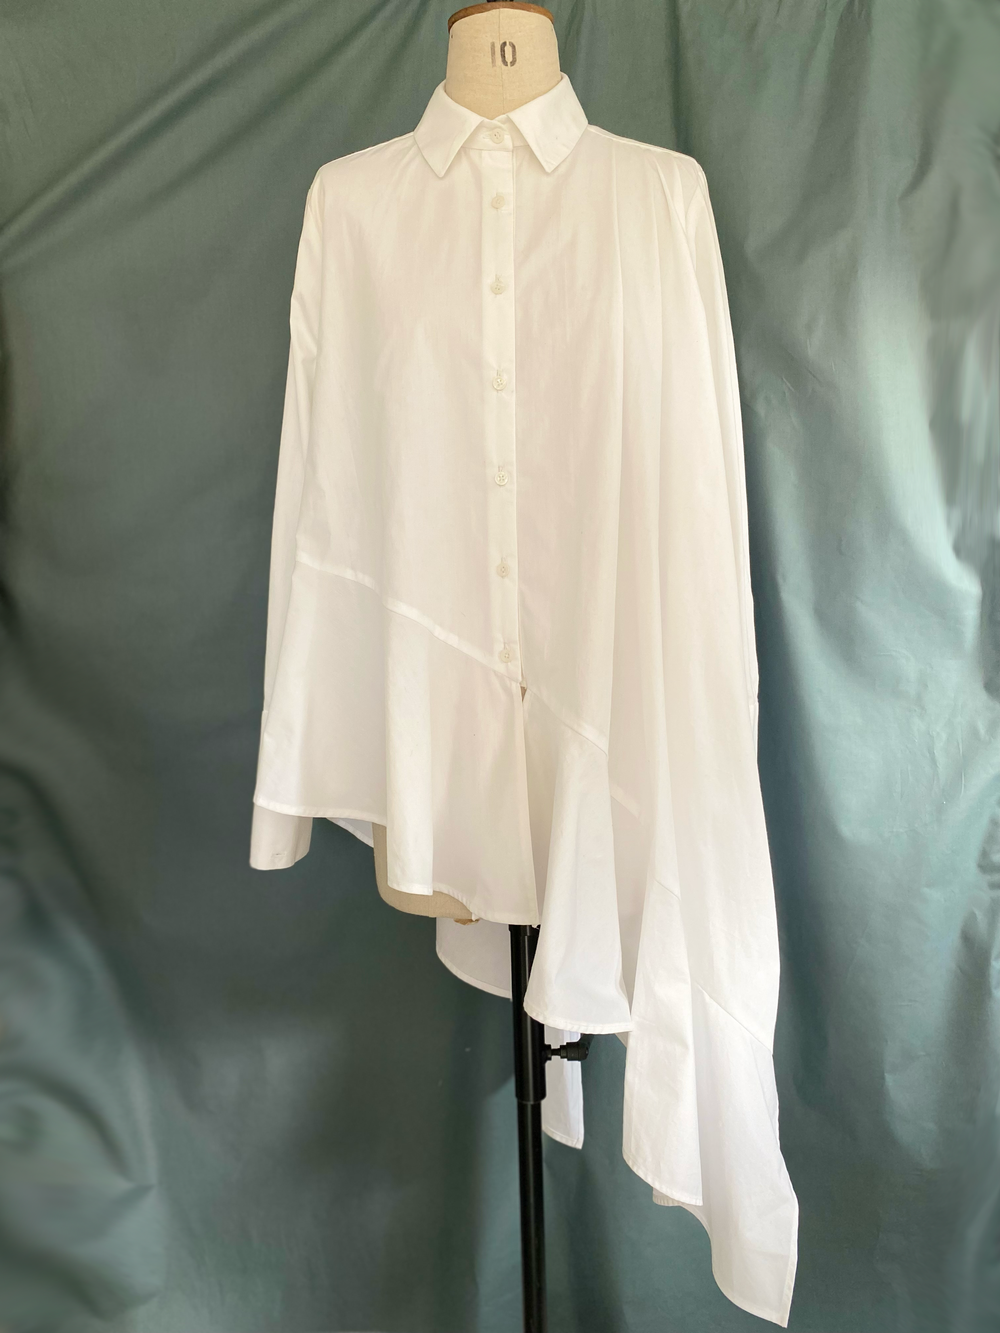 Mannequin wearing the TPCSH4 Ruffle Shirt sewing pattern from Trend Patterns on The Fold Line. A shirt pattern made in light to medium weight cotton fabrics, featuring an asymmetric trapeze silhouette, hem ruffle, front placket opening, back yoke, slim fi